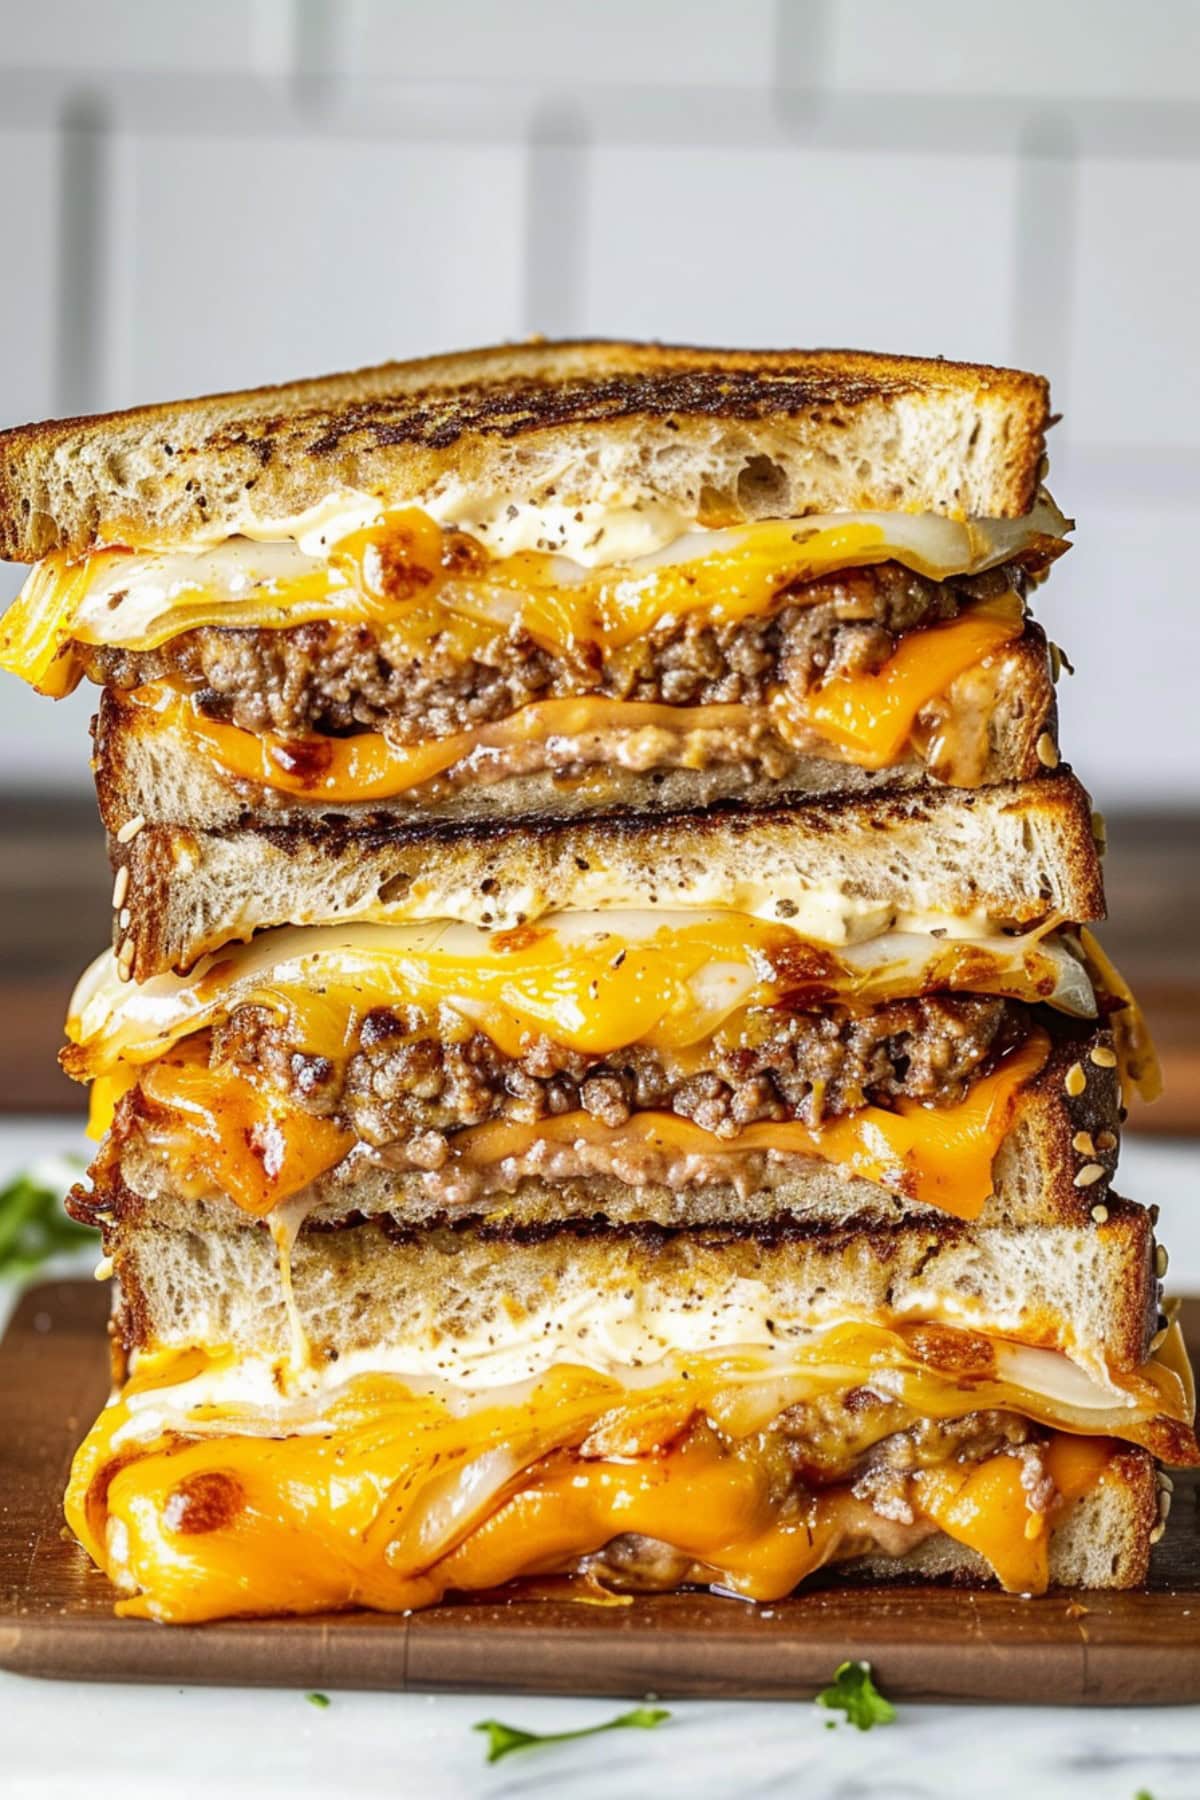 Three Cut Halves of Patty Melts with Gooey Cheese and Juicy Burgers Stacked on a Wooden Cutting Board